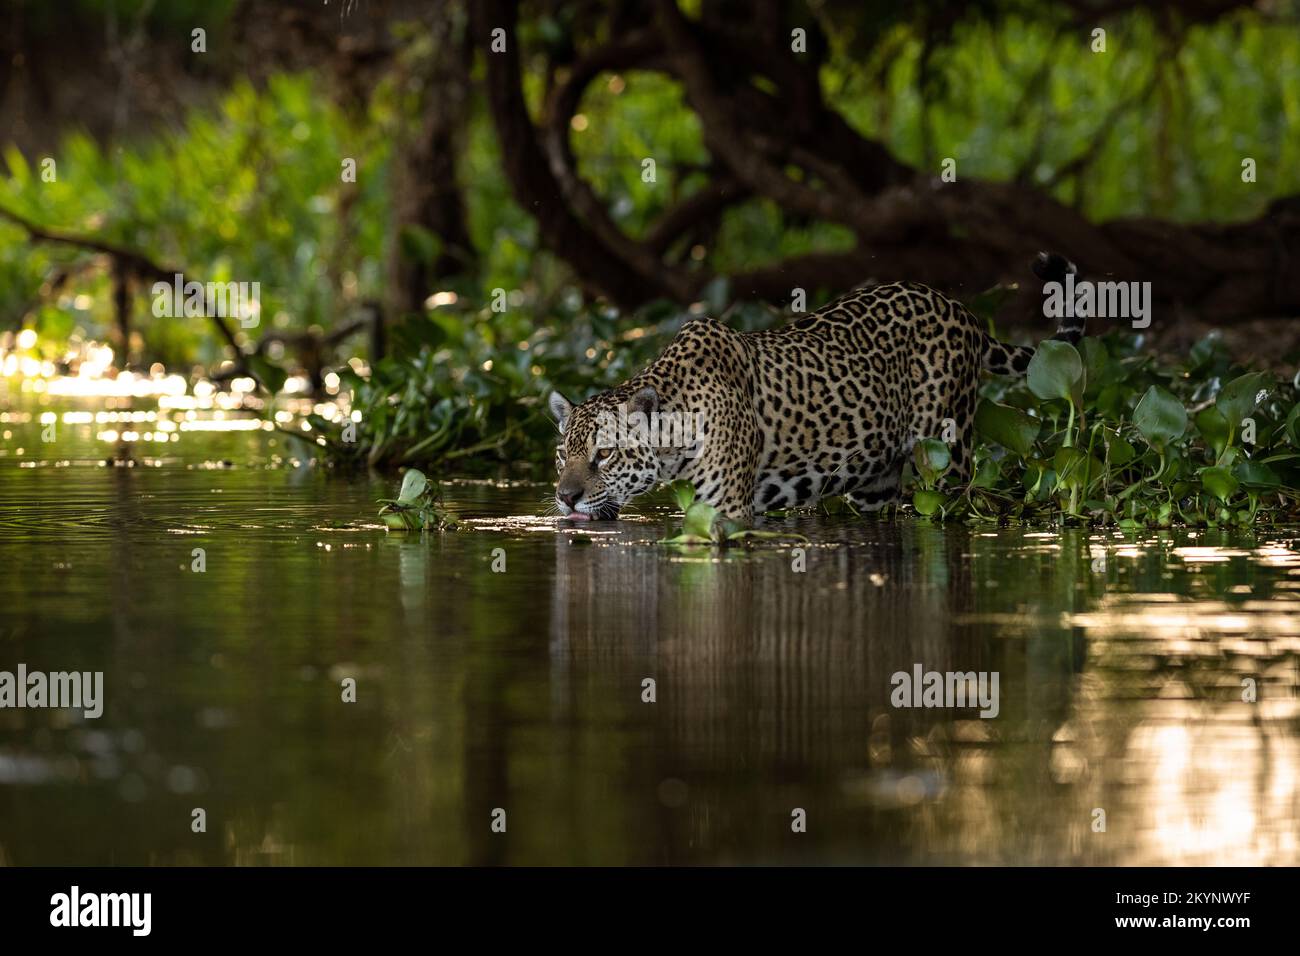 A Jaguar drinking water in the Pantanal of Brazil. Stock Photo